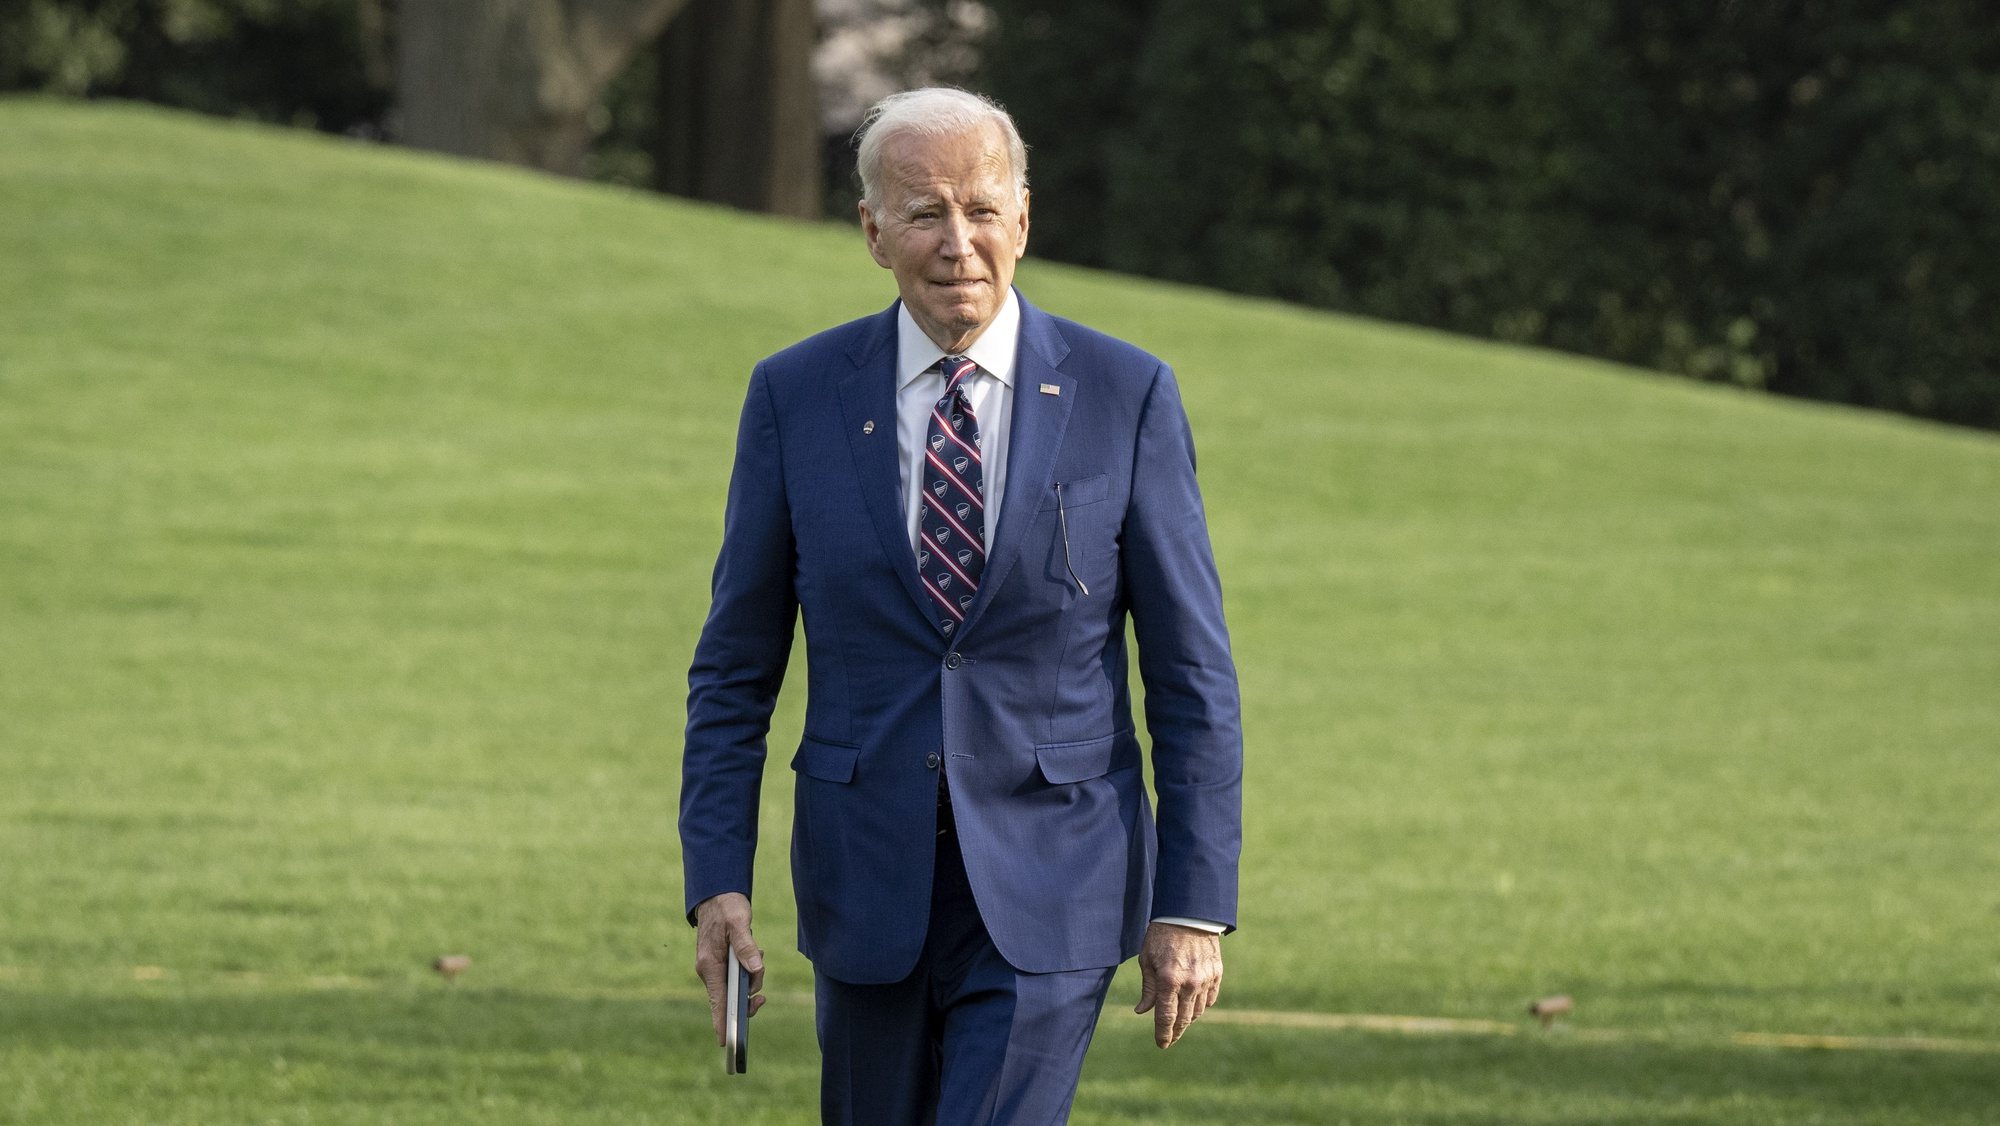 epa10548094 US President Joe Biden walks from Marine One after arriving on the South Lawn of the White House, in Washington, DC, USA, 28 March 2023. Biden was in Morrisville, North Carolina touring Wolfspeed, a semiconductor manufacturer.  EPA/Ken Cedeno / POOL